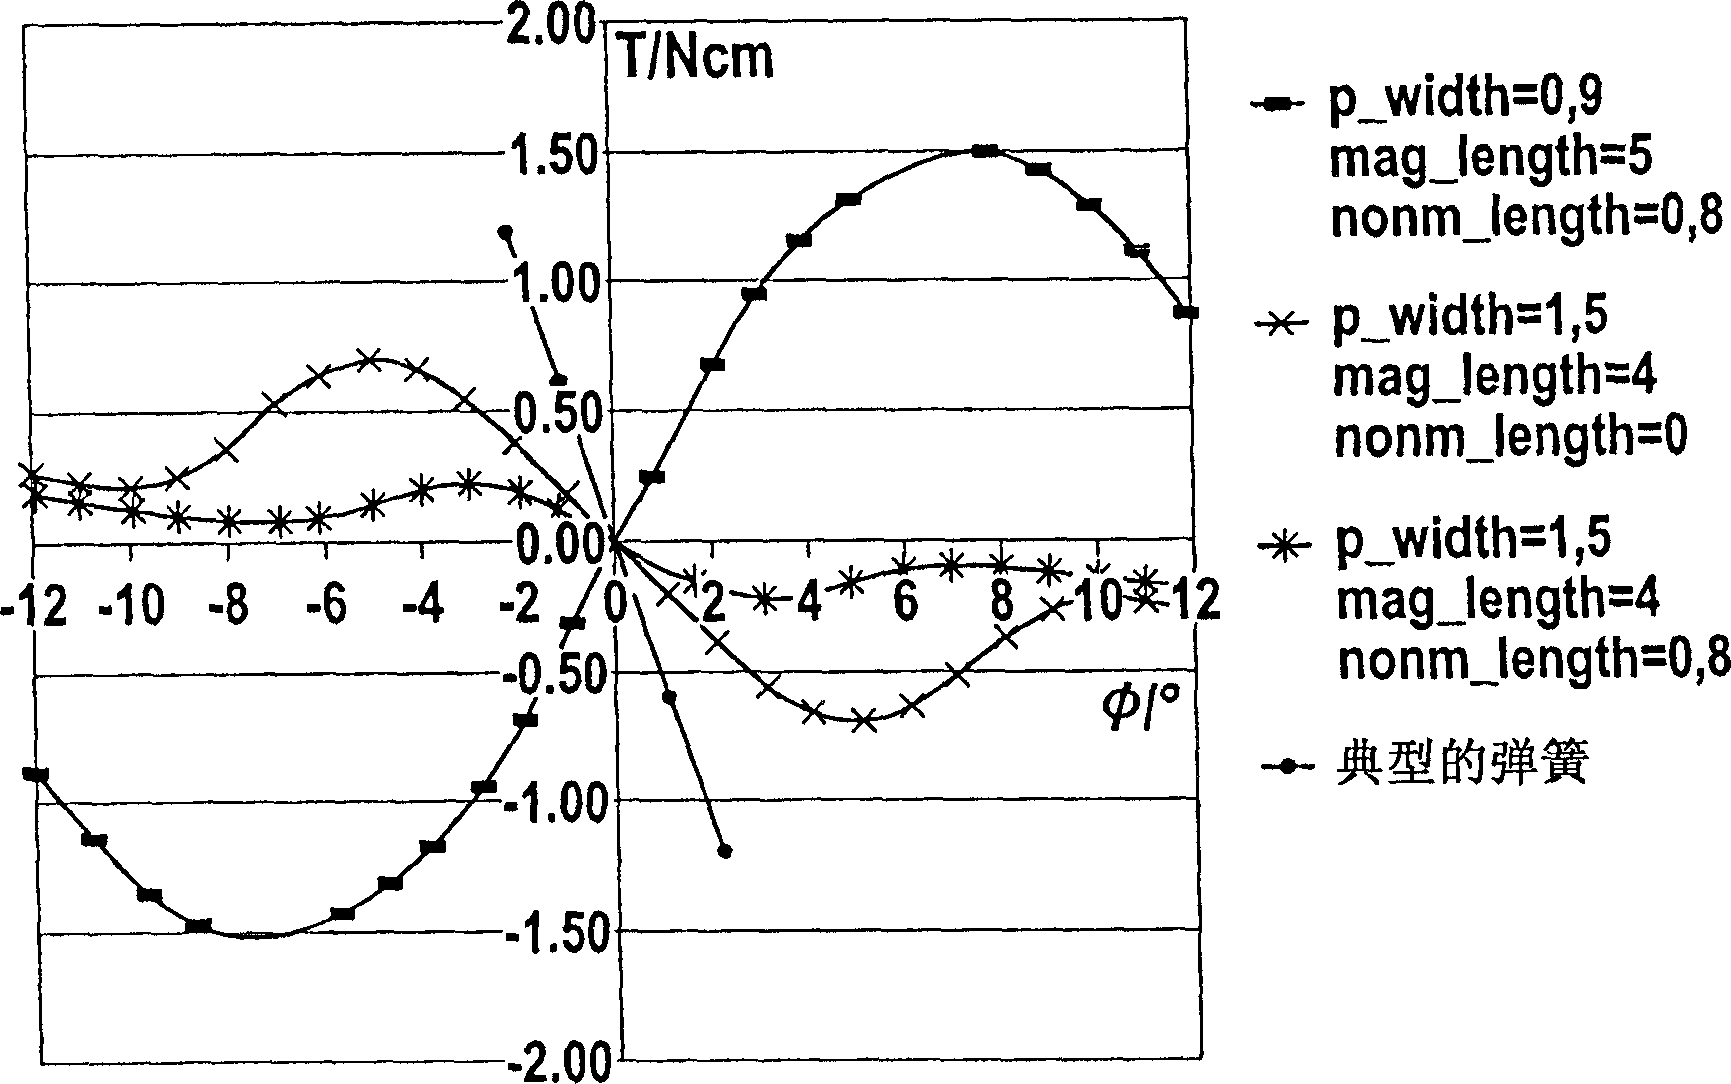 Drive unit for generating an oscillatory motion for electrical small-scale units